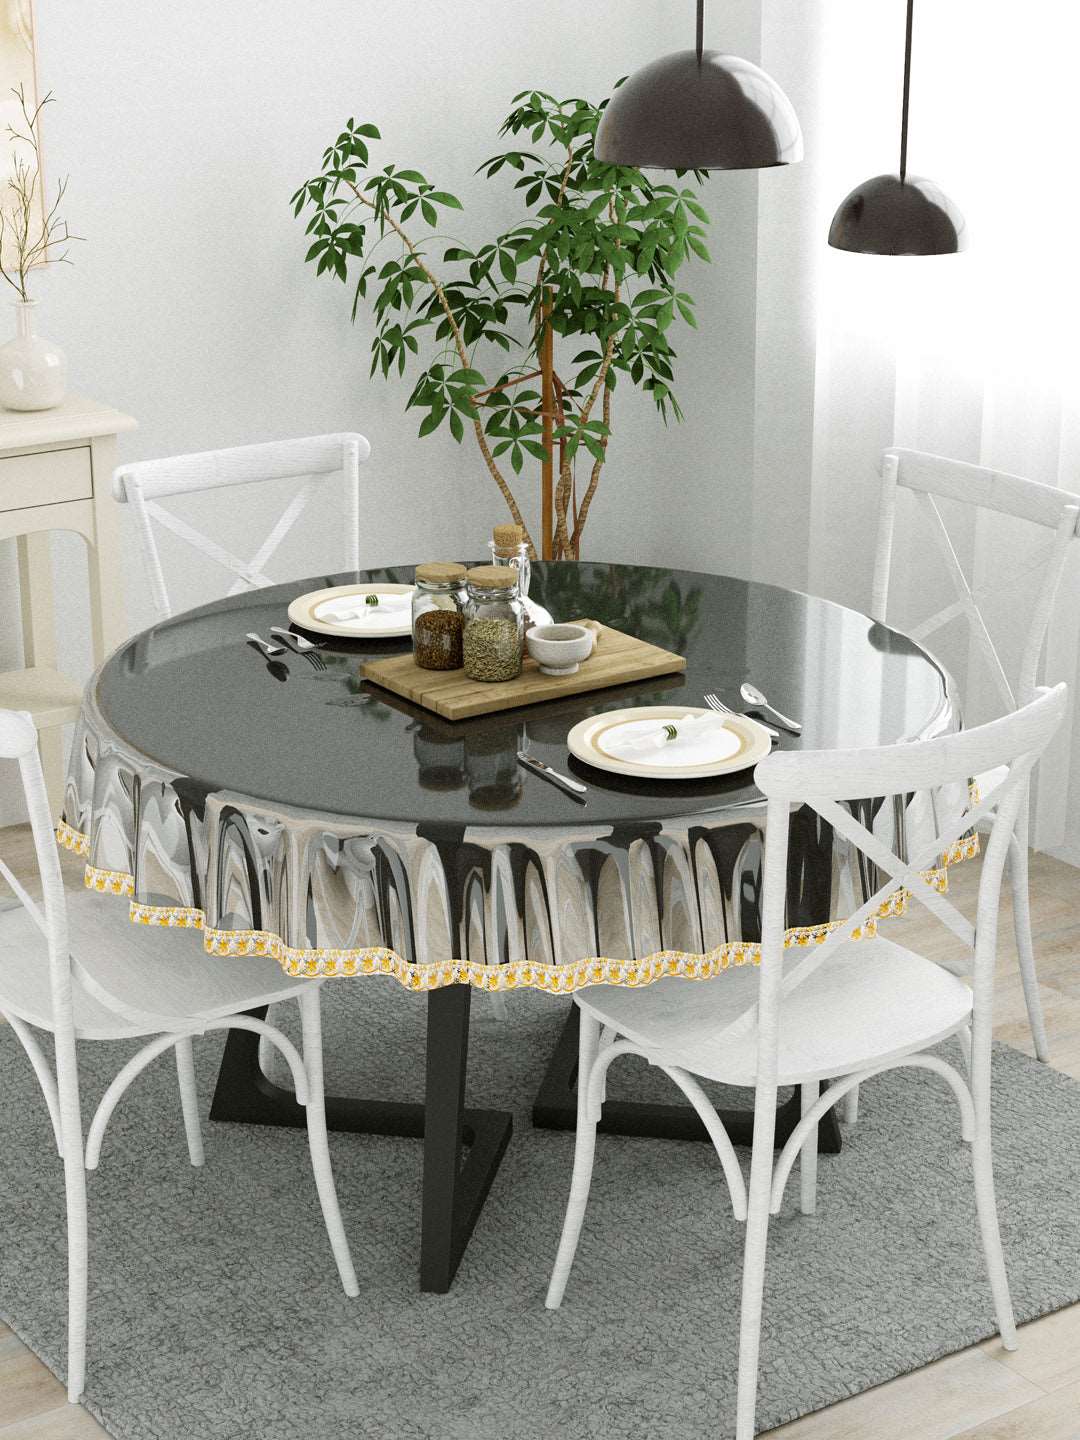 4 Seater Dining Table Cover; 60x60 Inches; Material - PVC; Anti Slip; Golden Sweet Lace